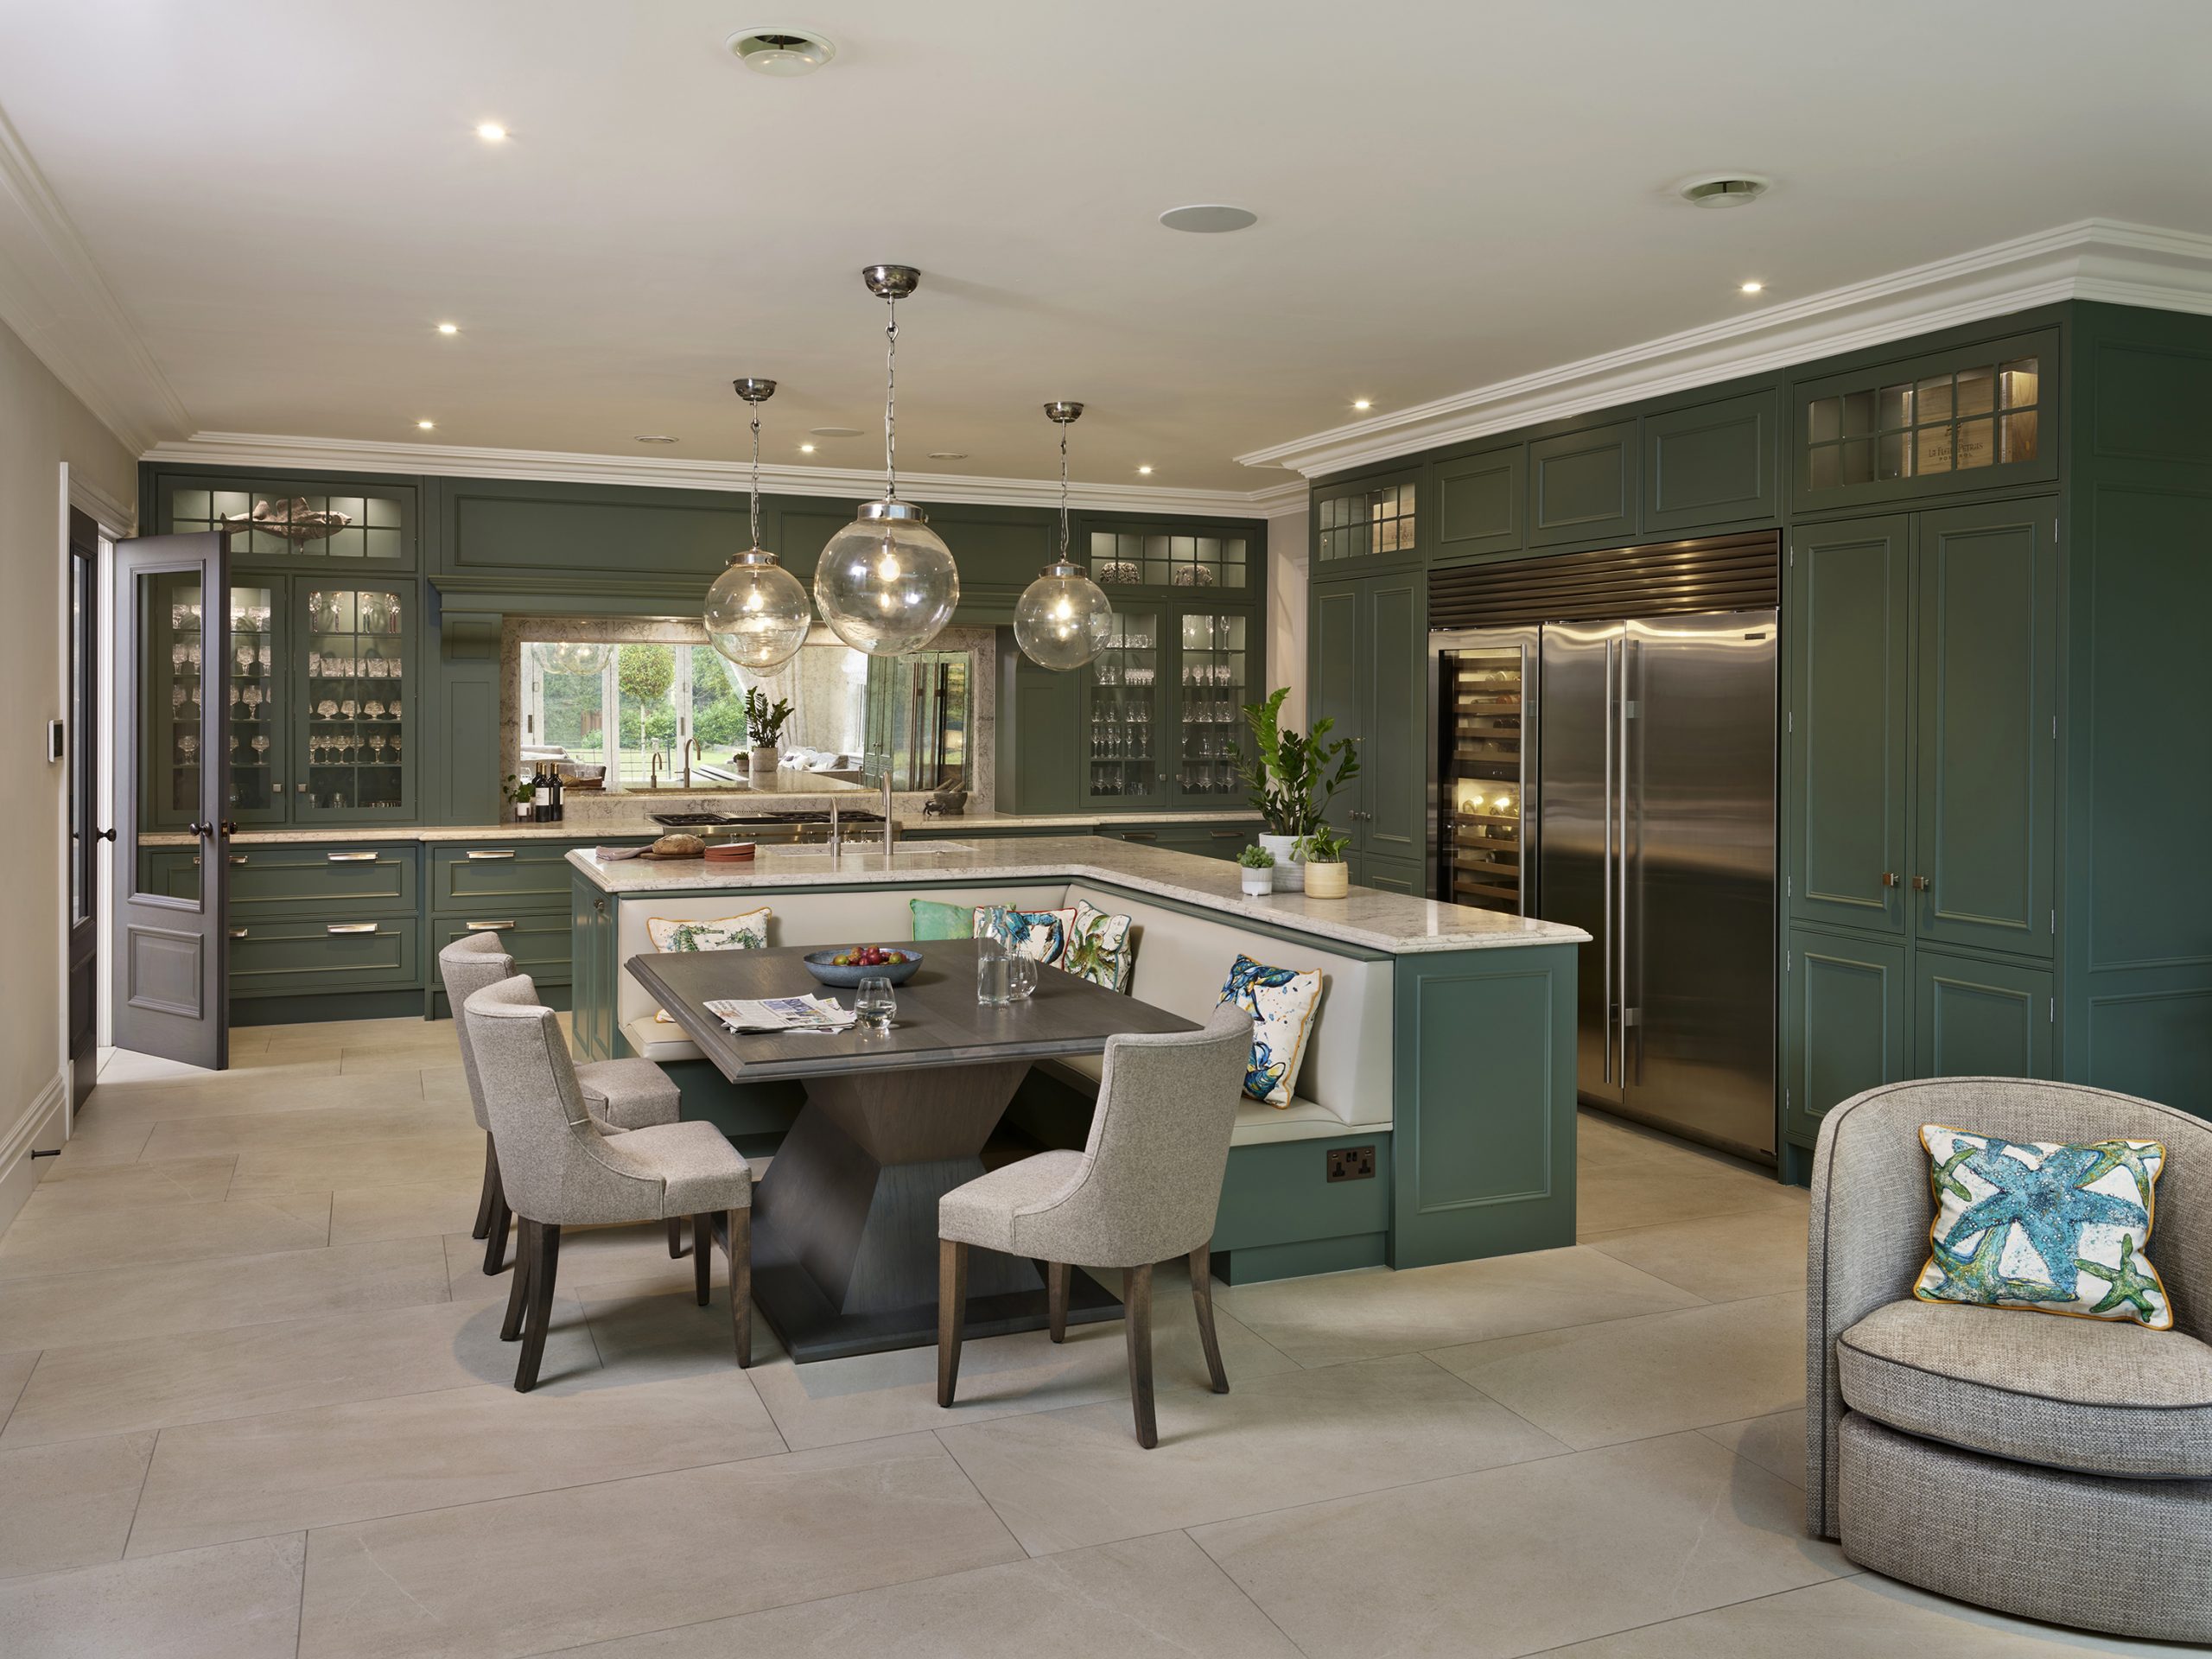 Deep green luxury kitchen with Sub-Zero wolf appliances, banquette seating integrated into the island. 